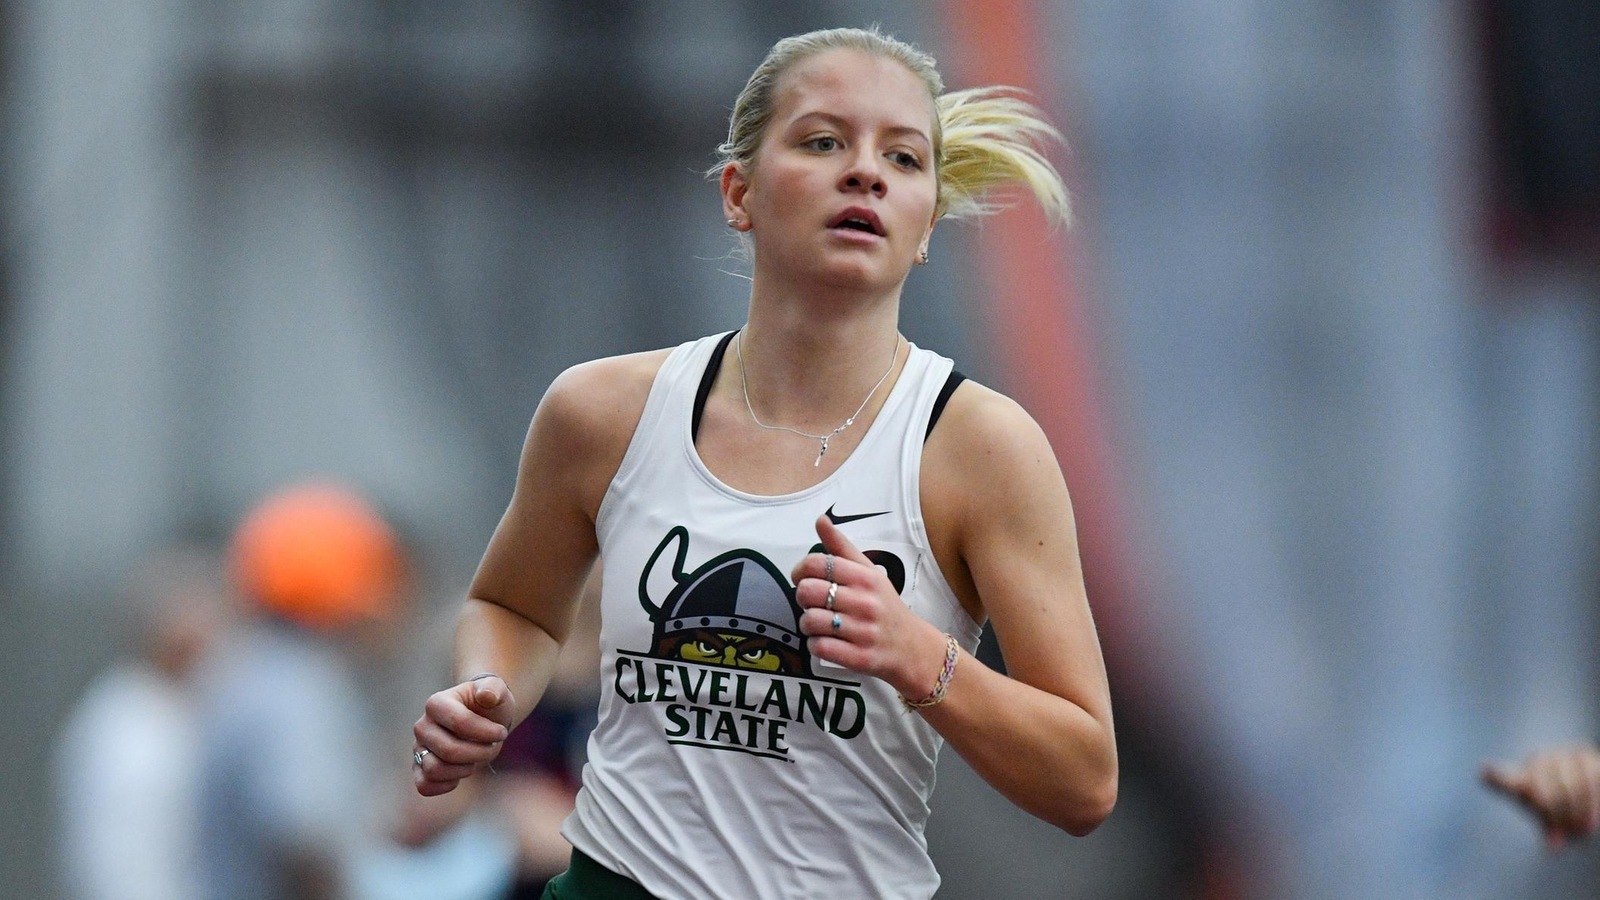 Cleveland State Track & Field Wins Two Events At Spark Adams Invitational